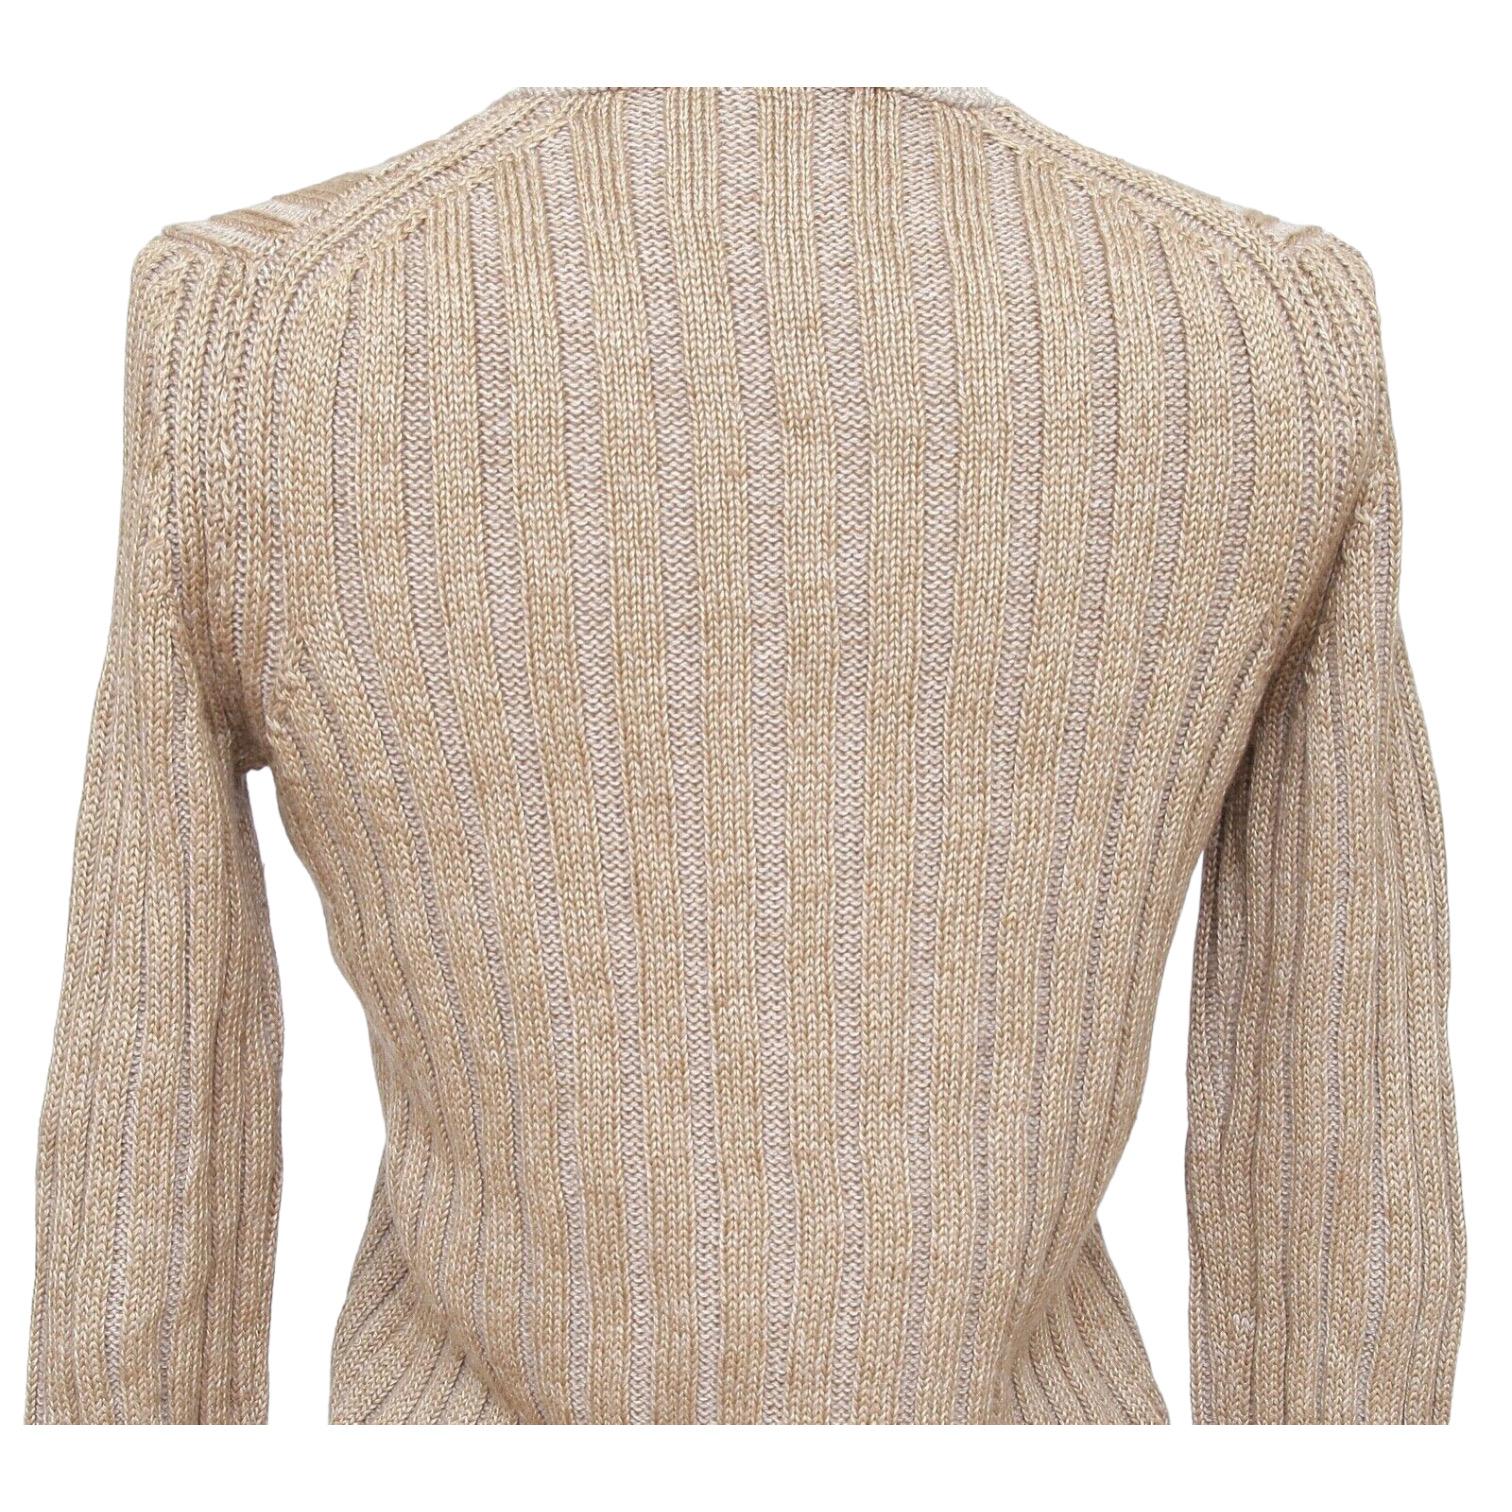 CHLOE Top Sweater Knit 3/4 Sleeve Beige Leather Ribbed Sz XS 2011 2